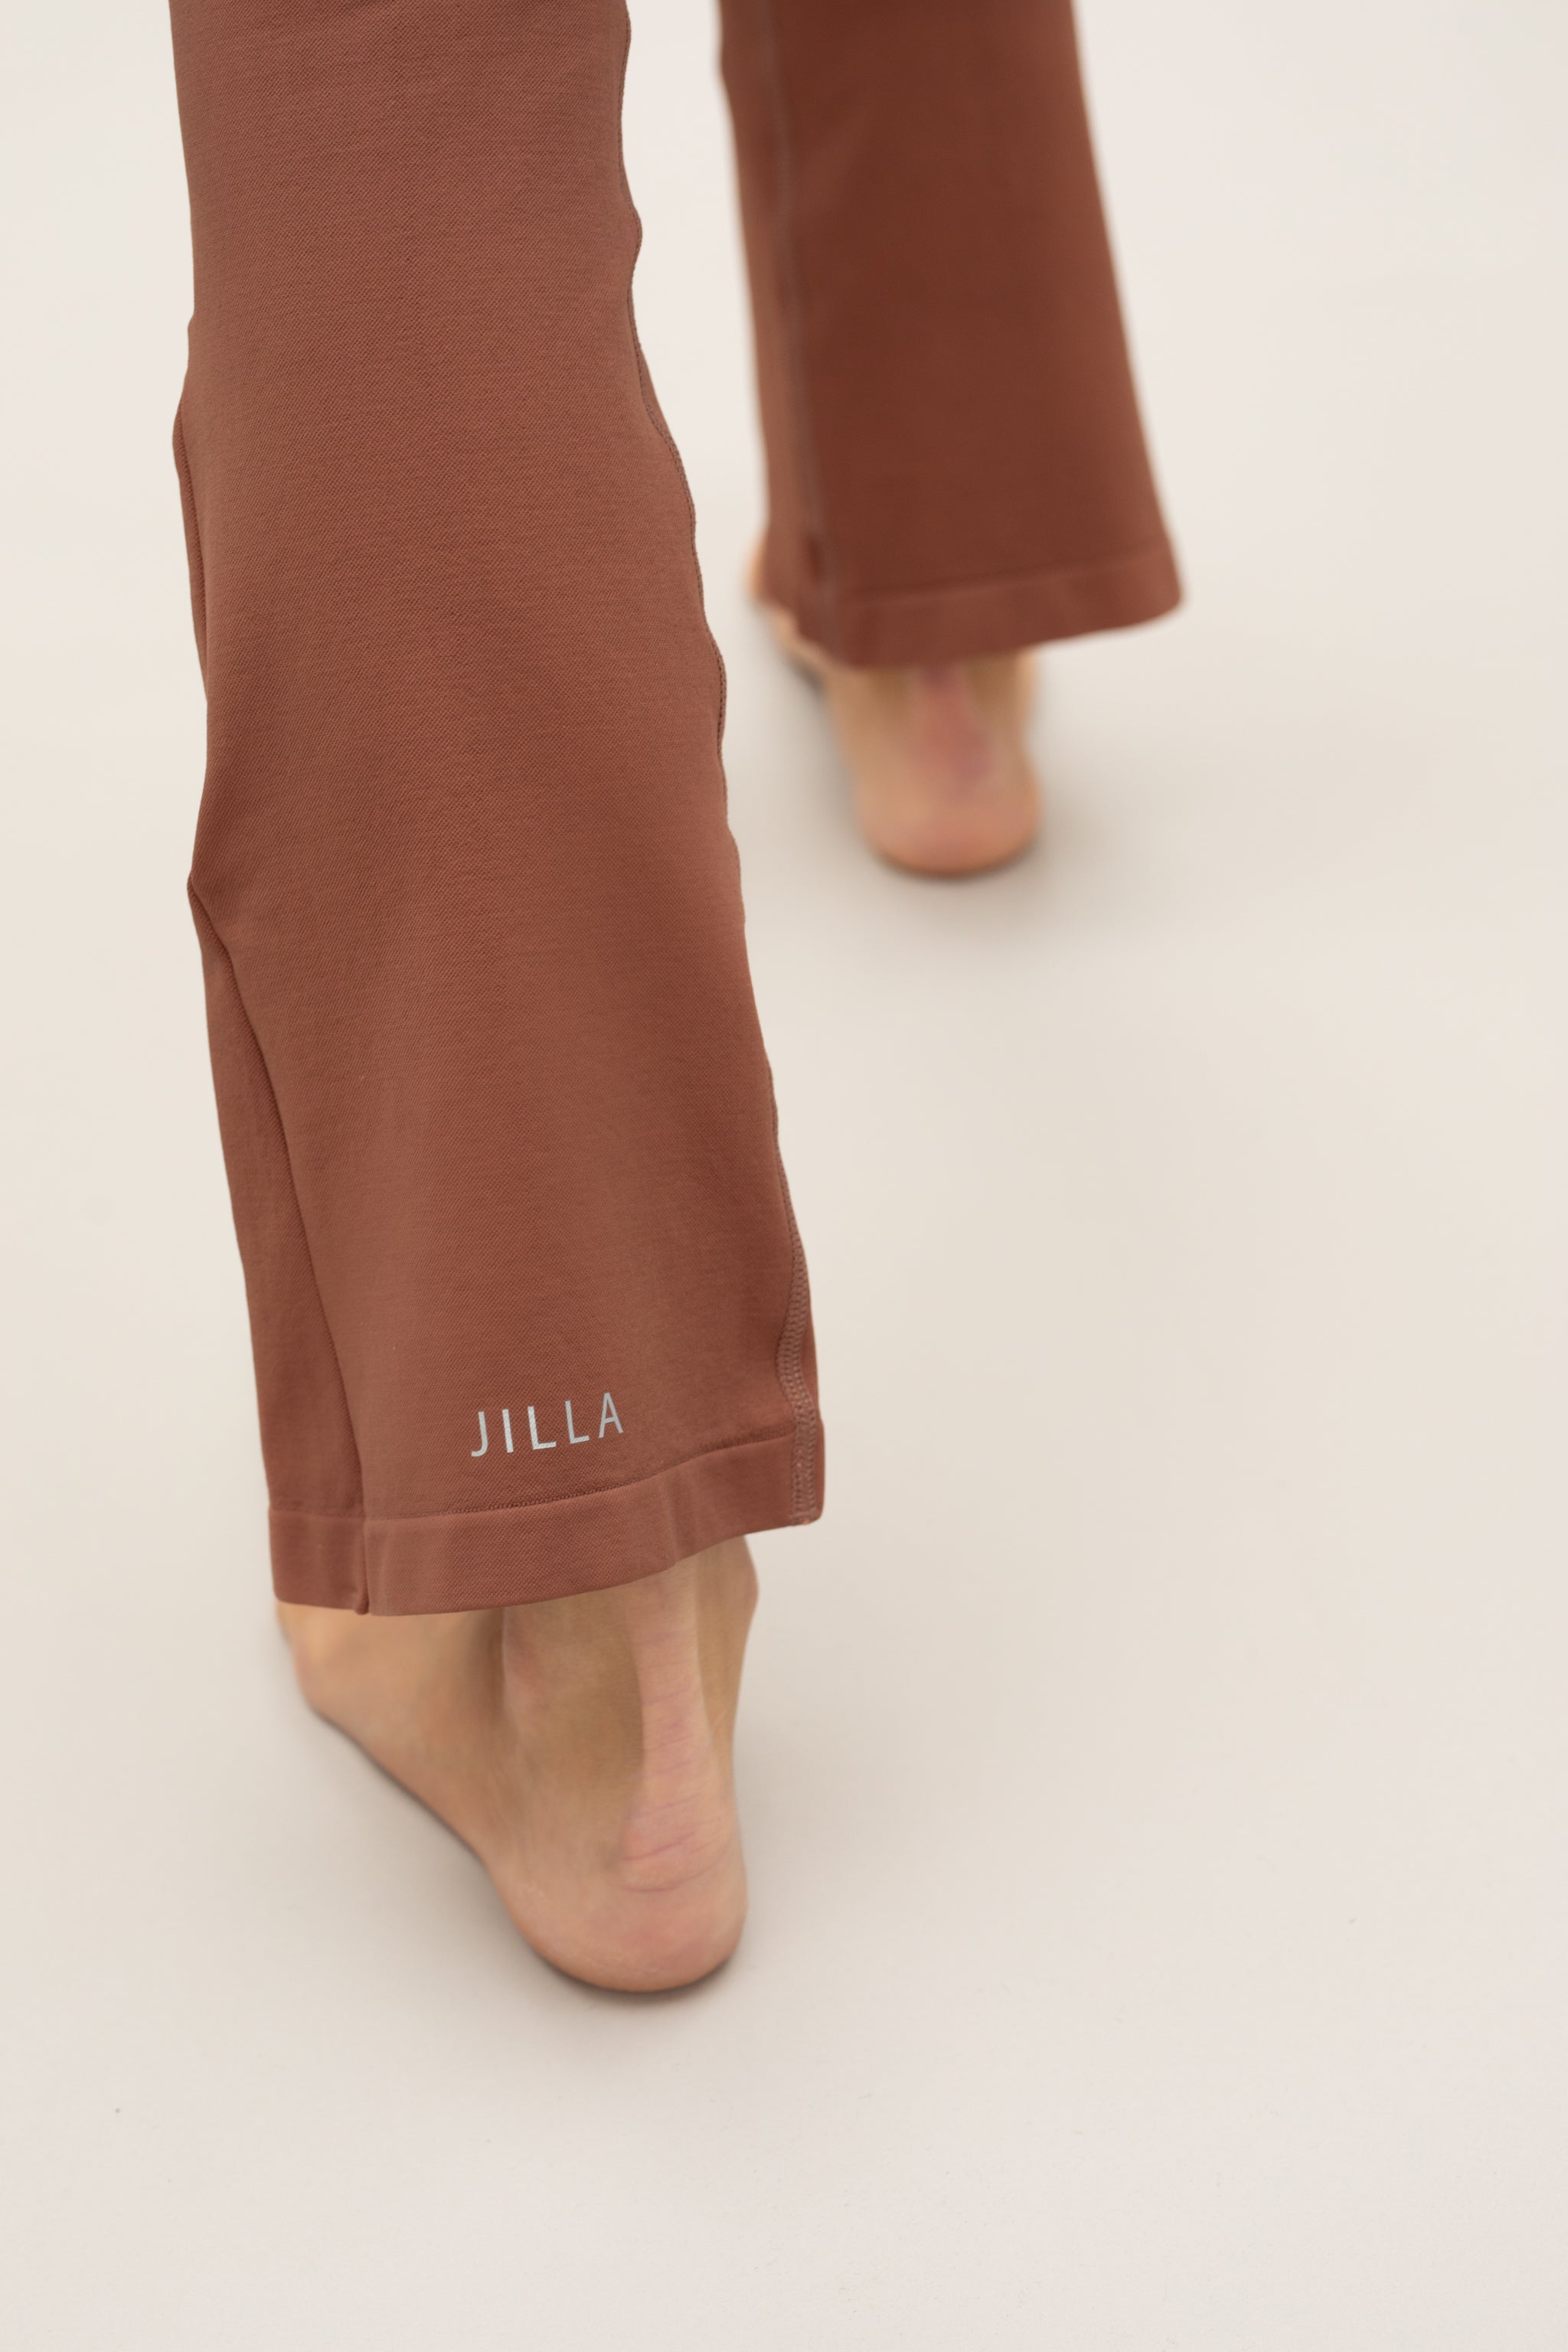 Cinnamon flare leggings with Cinnamon supportive sports bra by sustainable women's activewear brand, Jilla.  